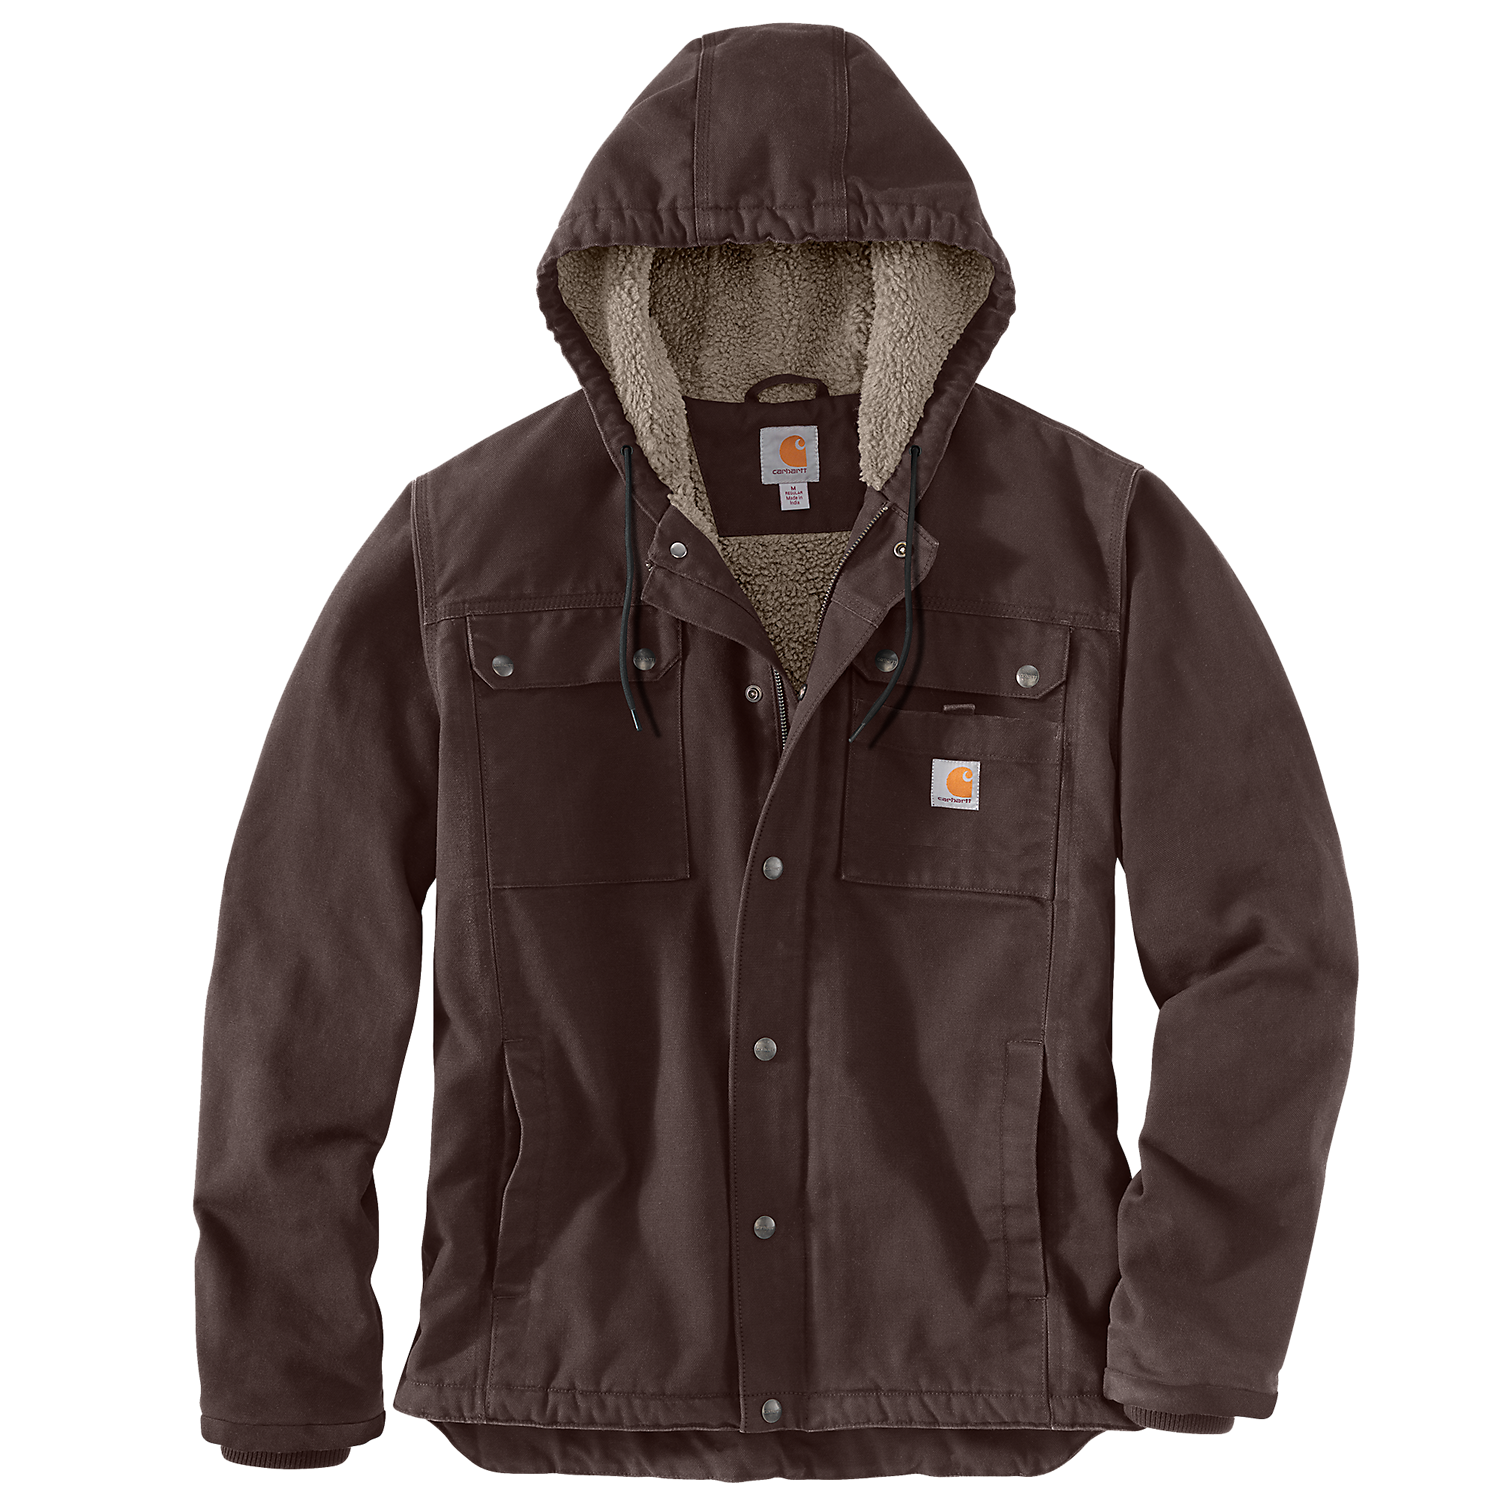 Carhartt Montana Loose Fit Insulated Jacket 105474